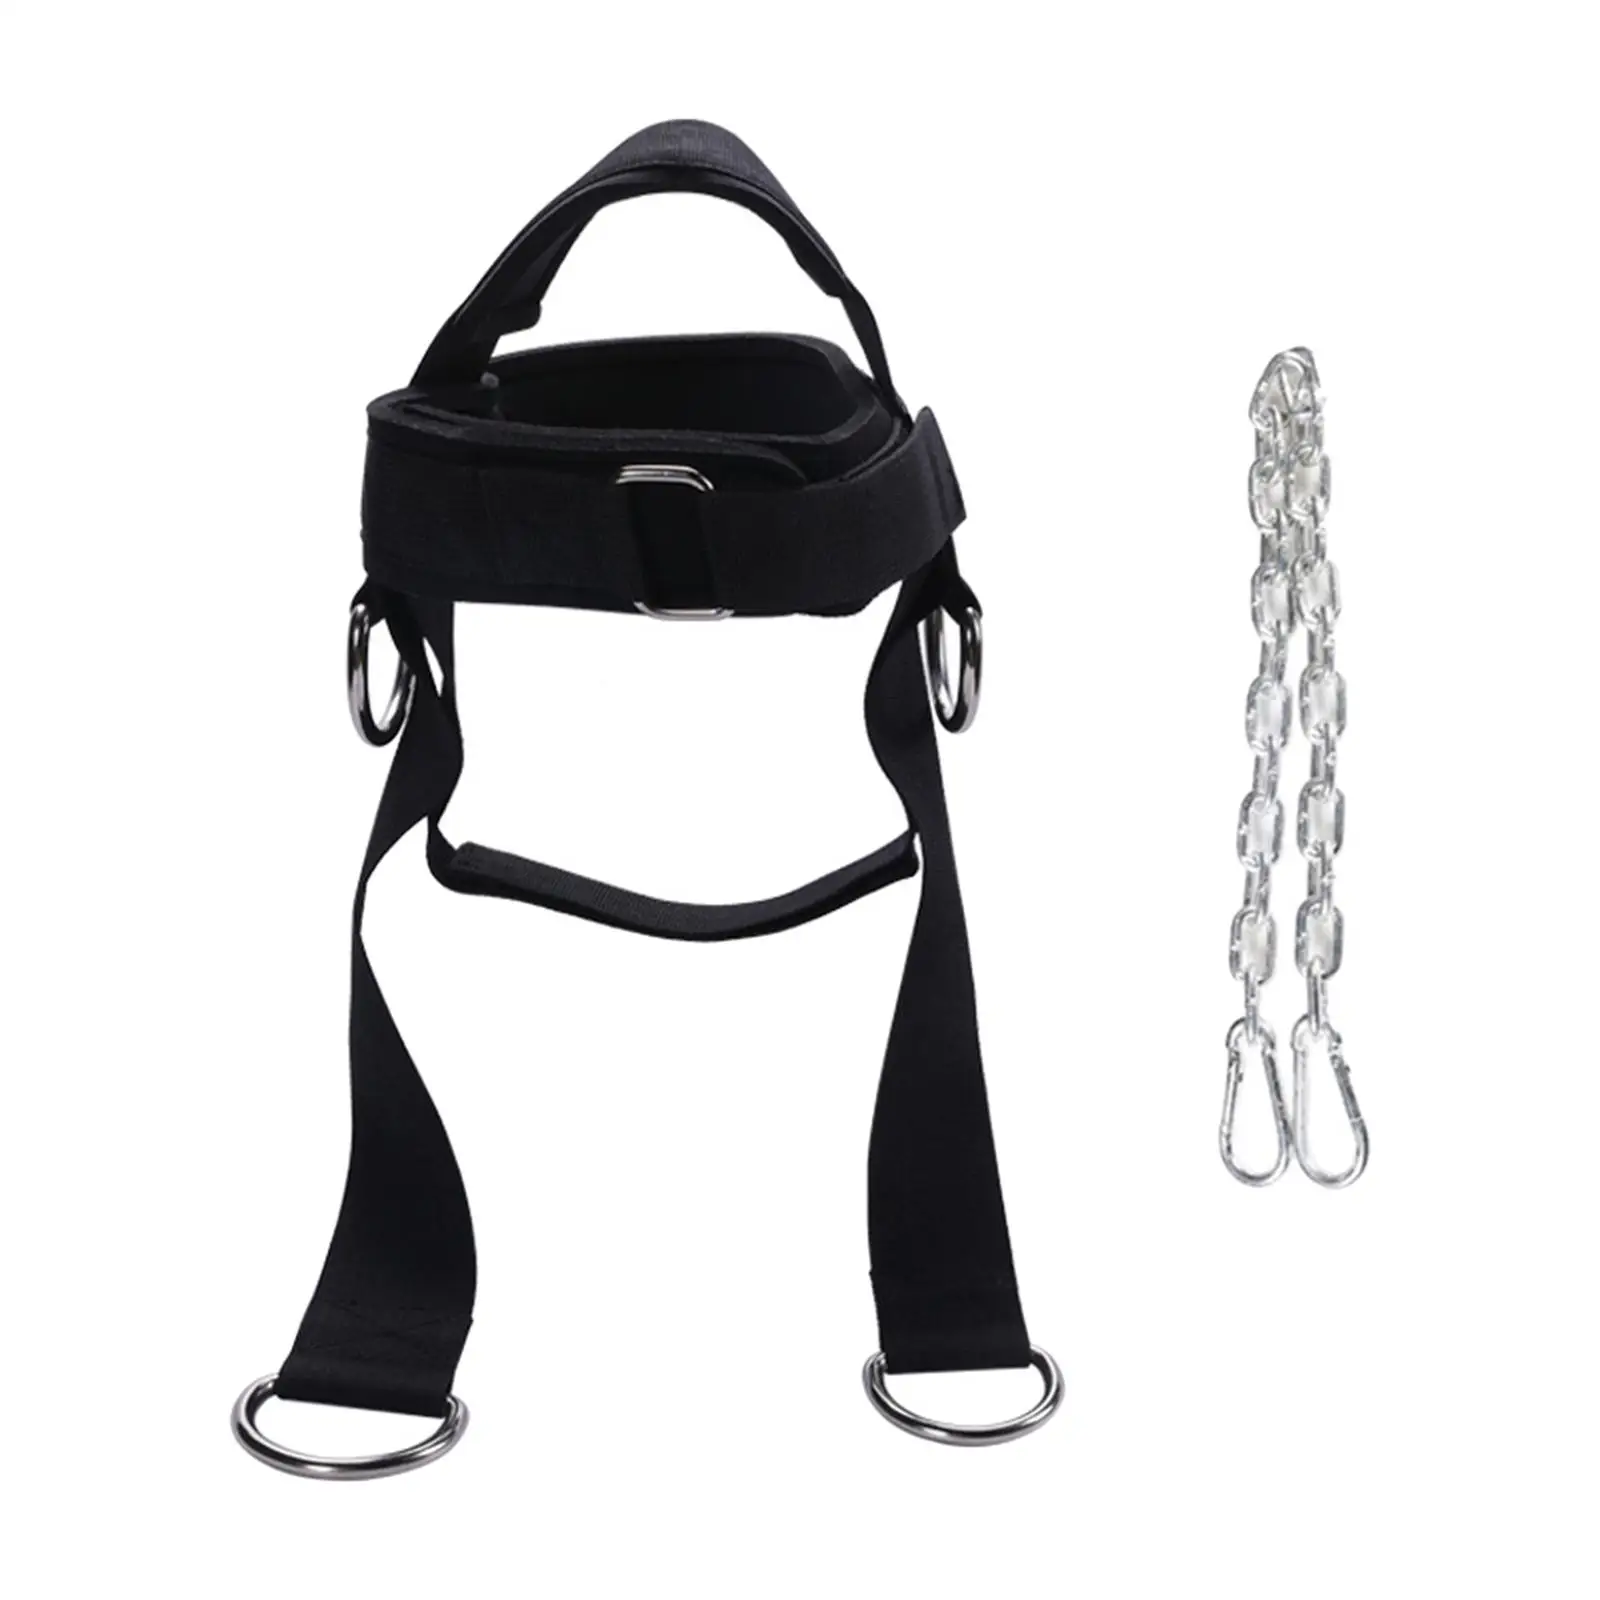 Head Neck Training Exerciser, Head Neck Harness with Metal Chain Strength